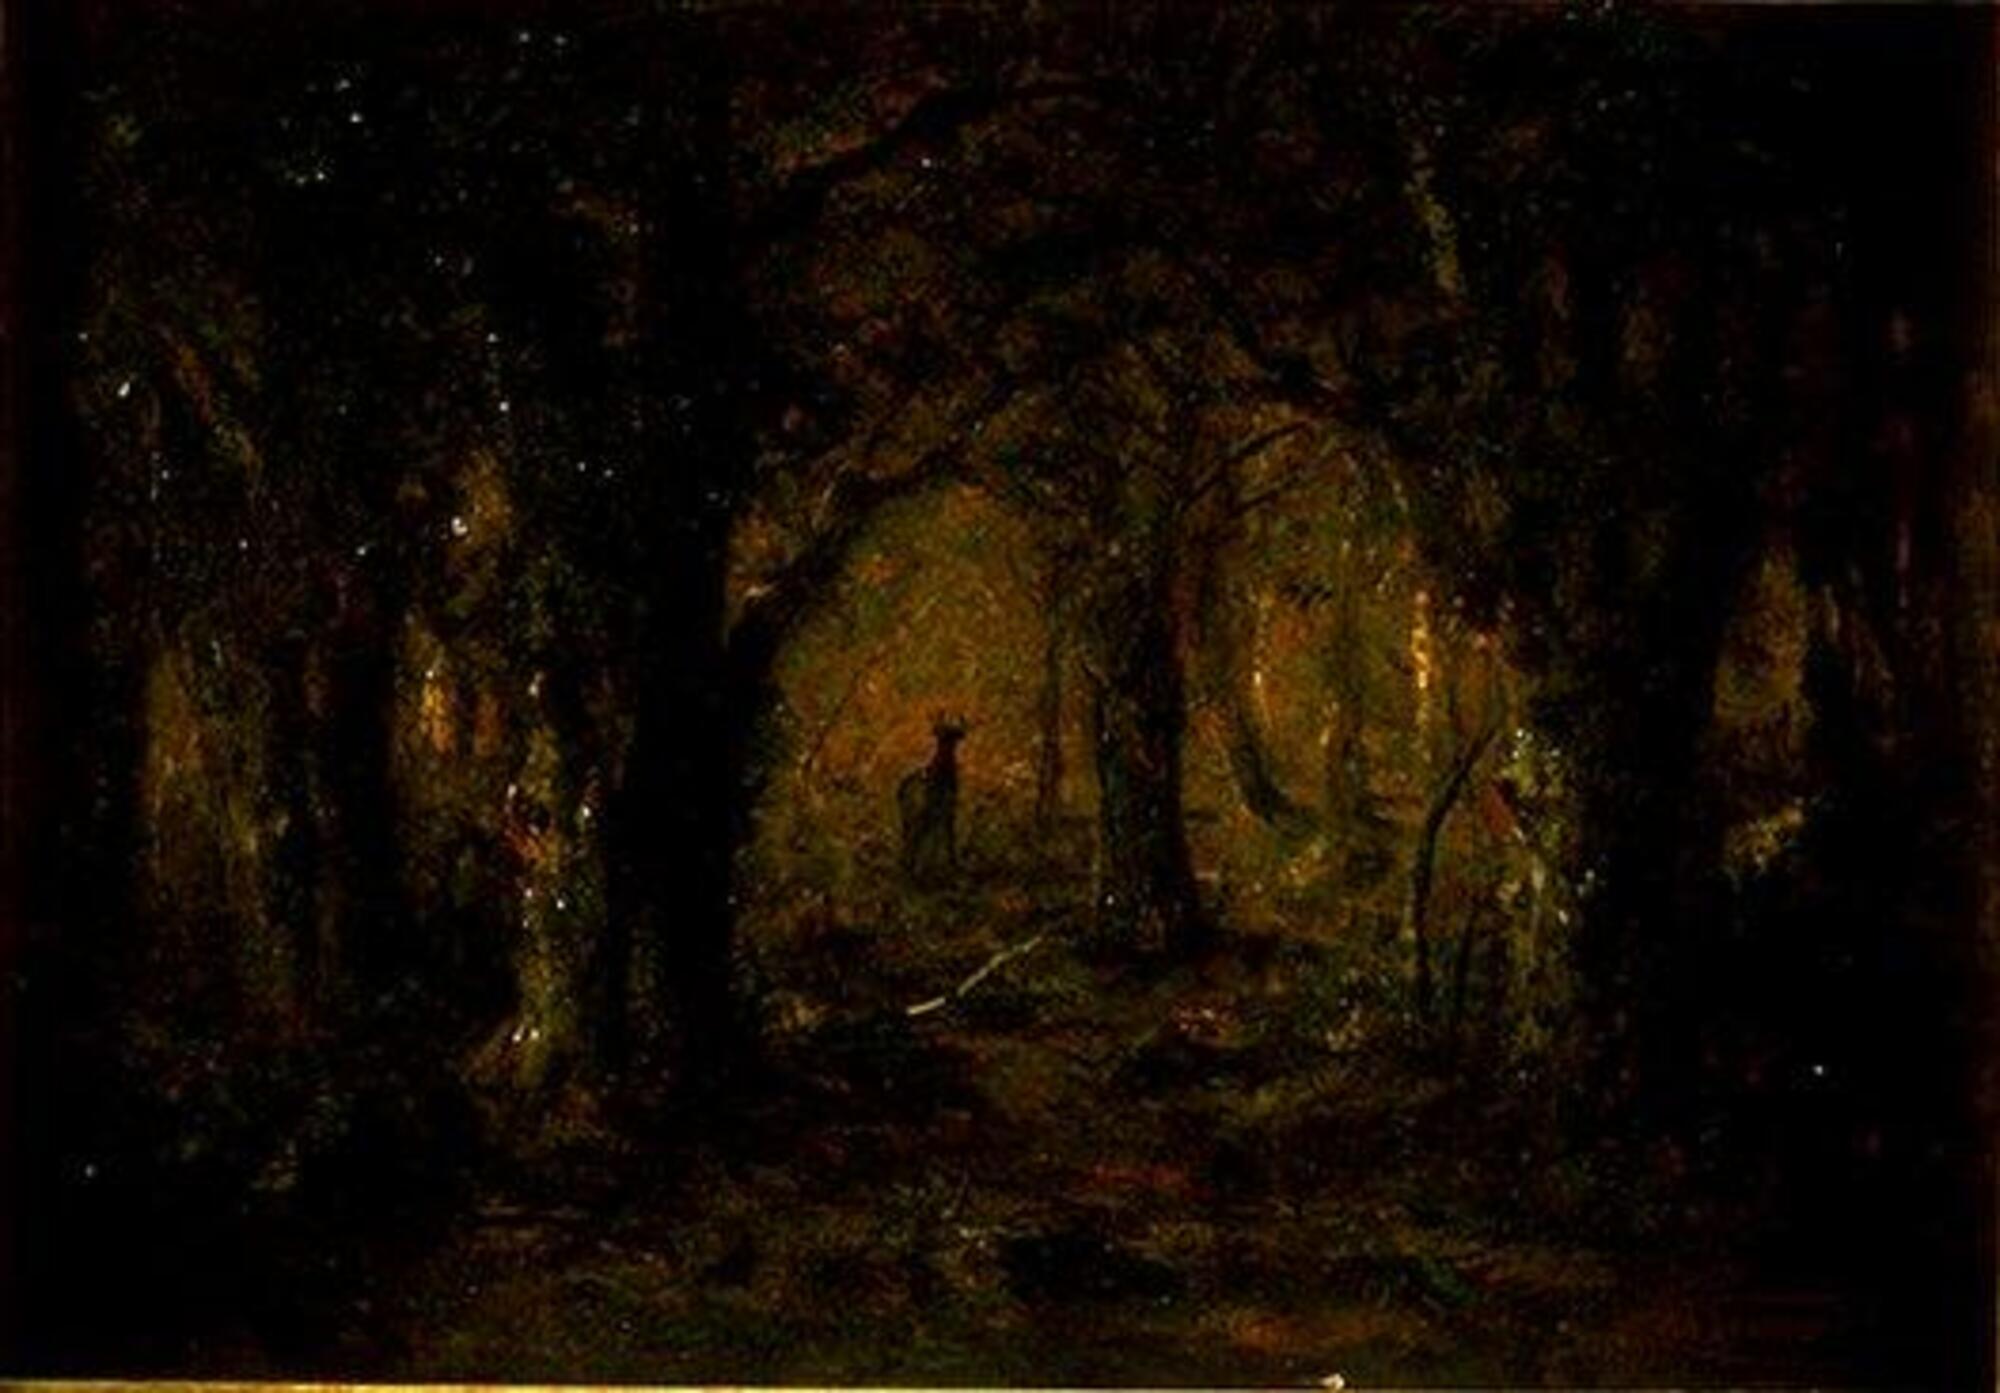 Landscape painting depicting trees with a solitary deer in the center of the canvas